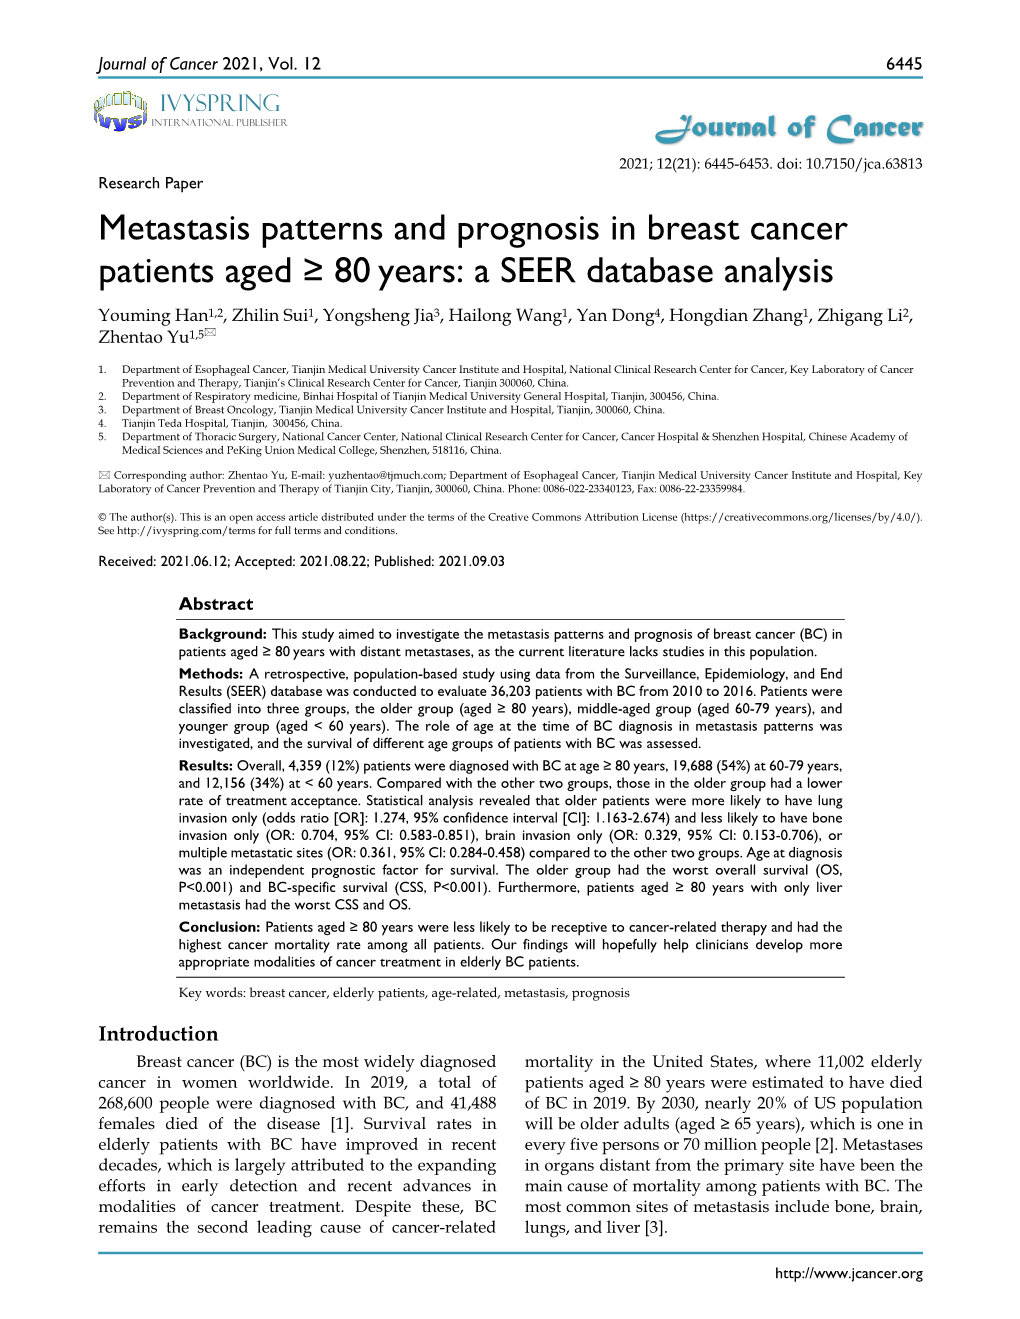 Metastasis Patterns and Prognosis in Breast Cancer Patients Aged ≥ 80